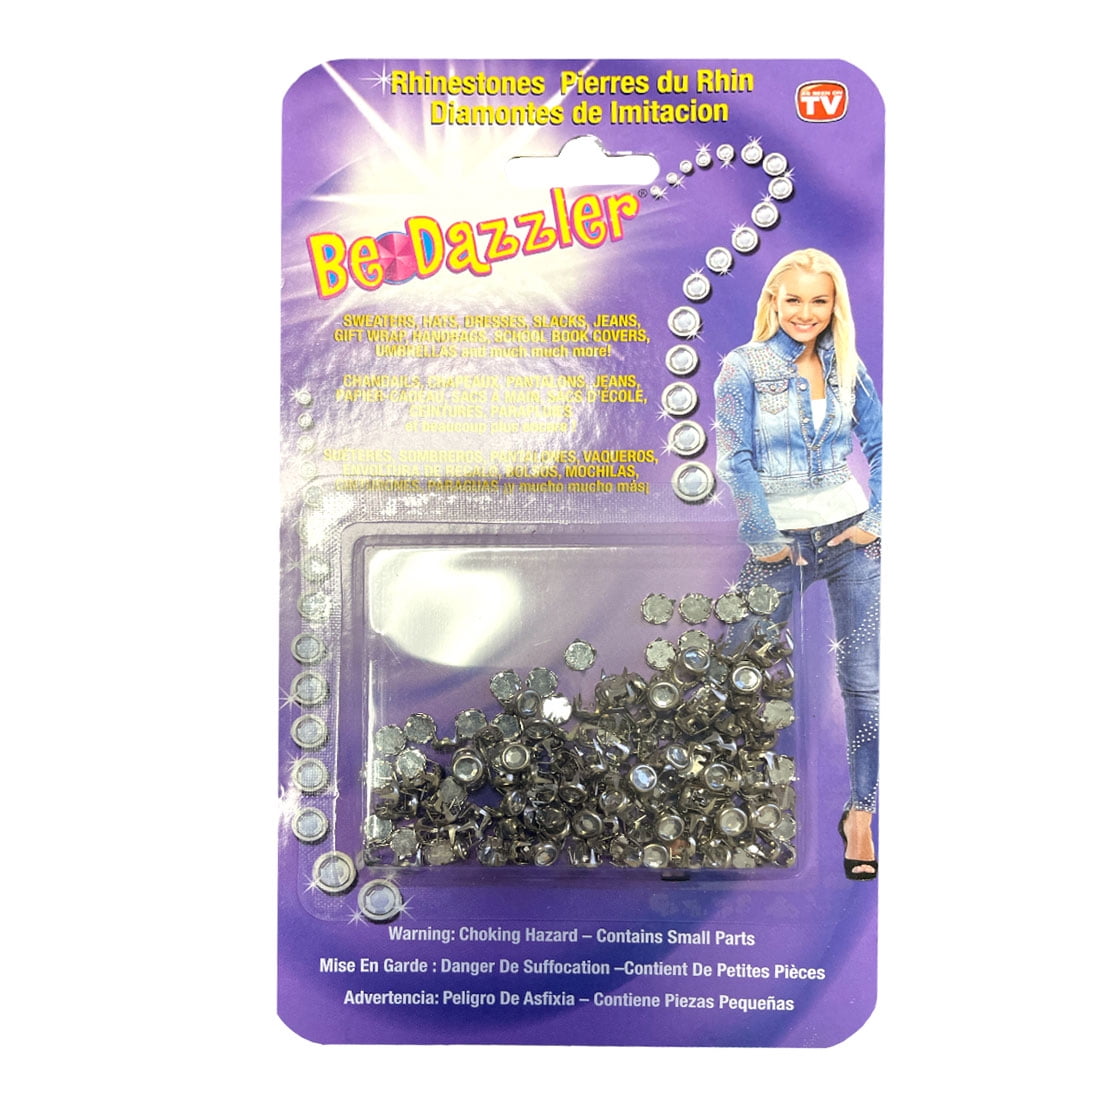 bedazzler kit products for sale